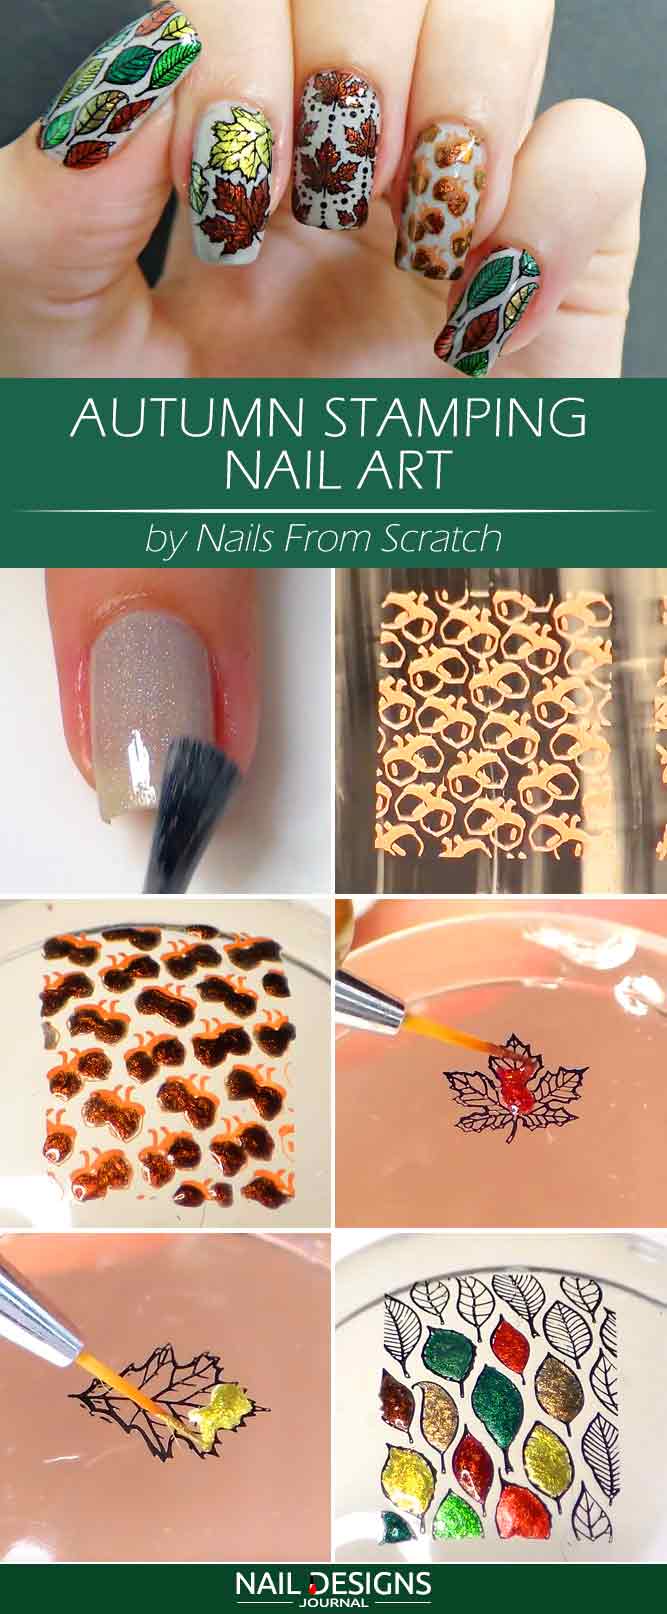 Nail Stamping Designs and Tutorials to Try - Nail Designs Journal